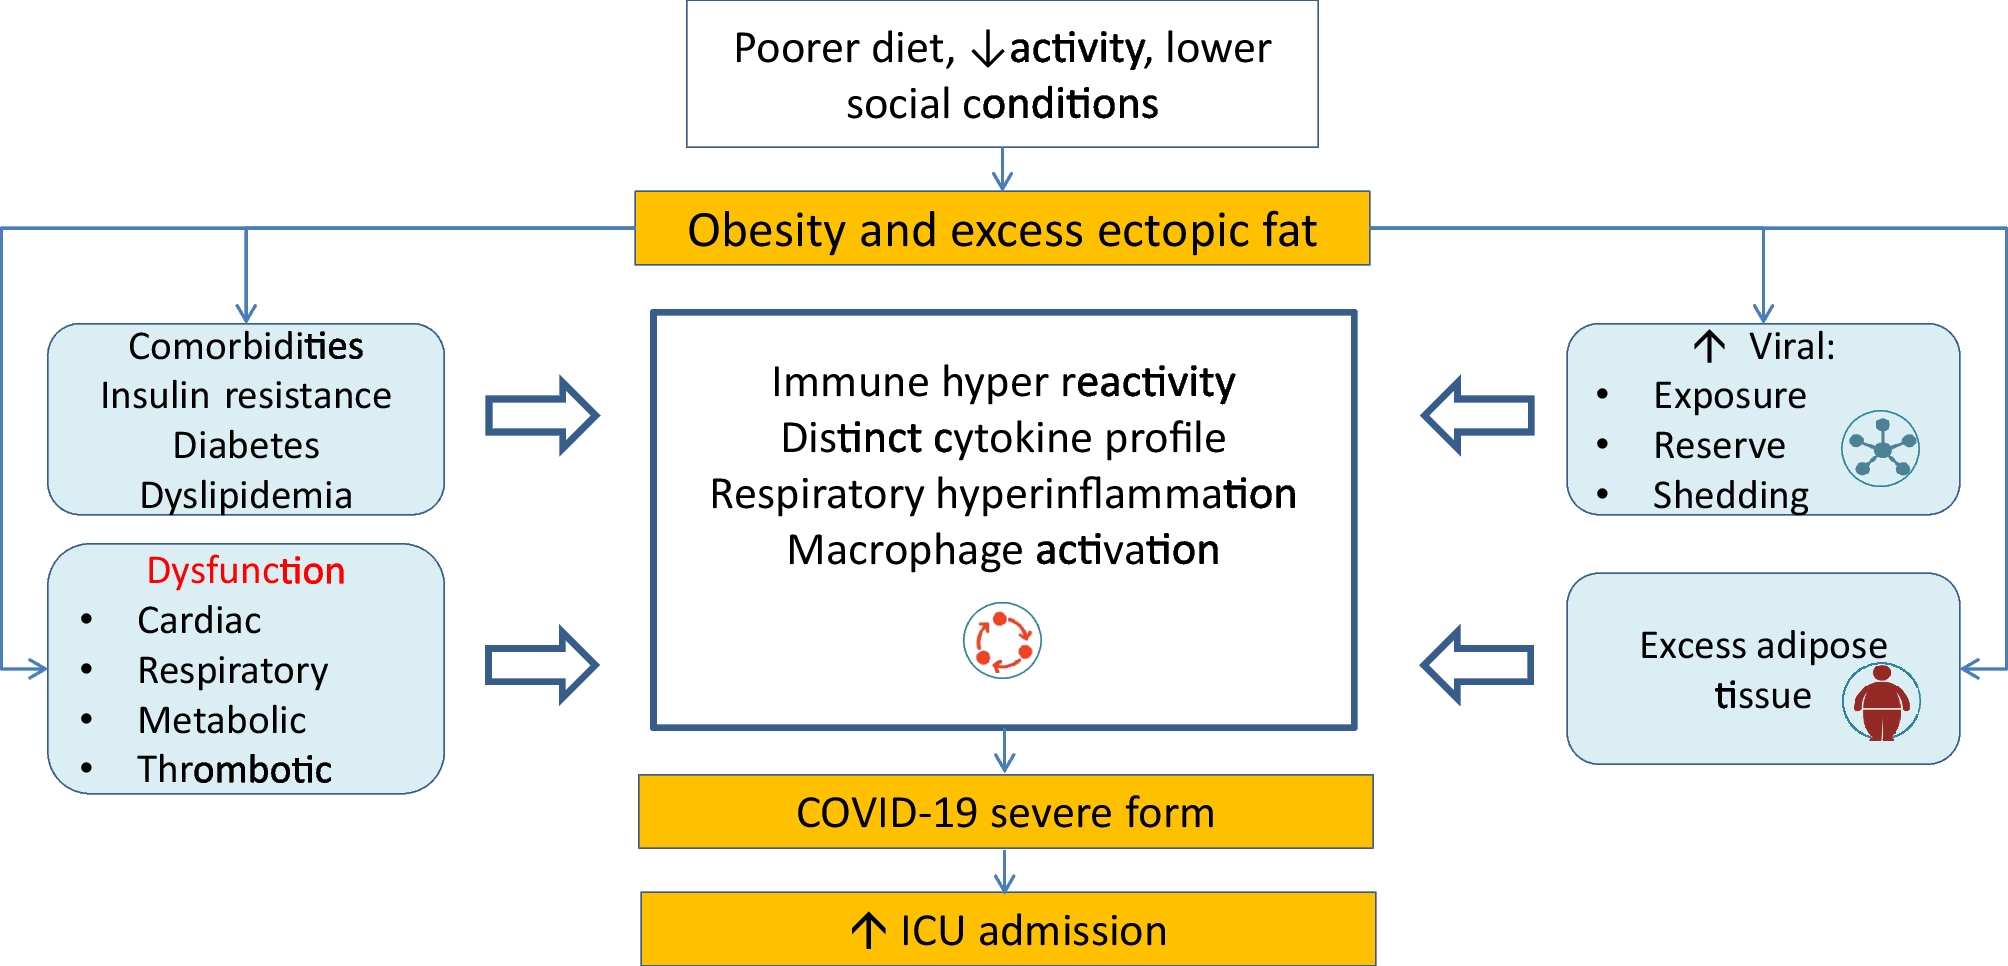 Specific and Non-specific Aspects and Future Challenges of ICU Care Among COVID-19 Patients with Obesity: A Narrative Review